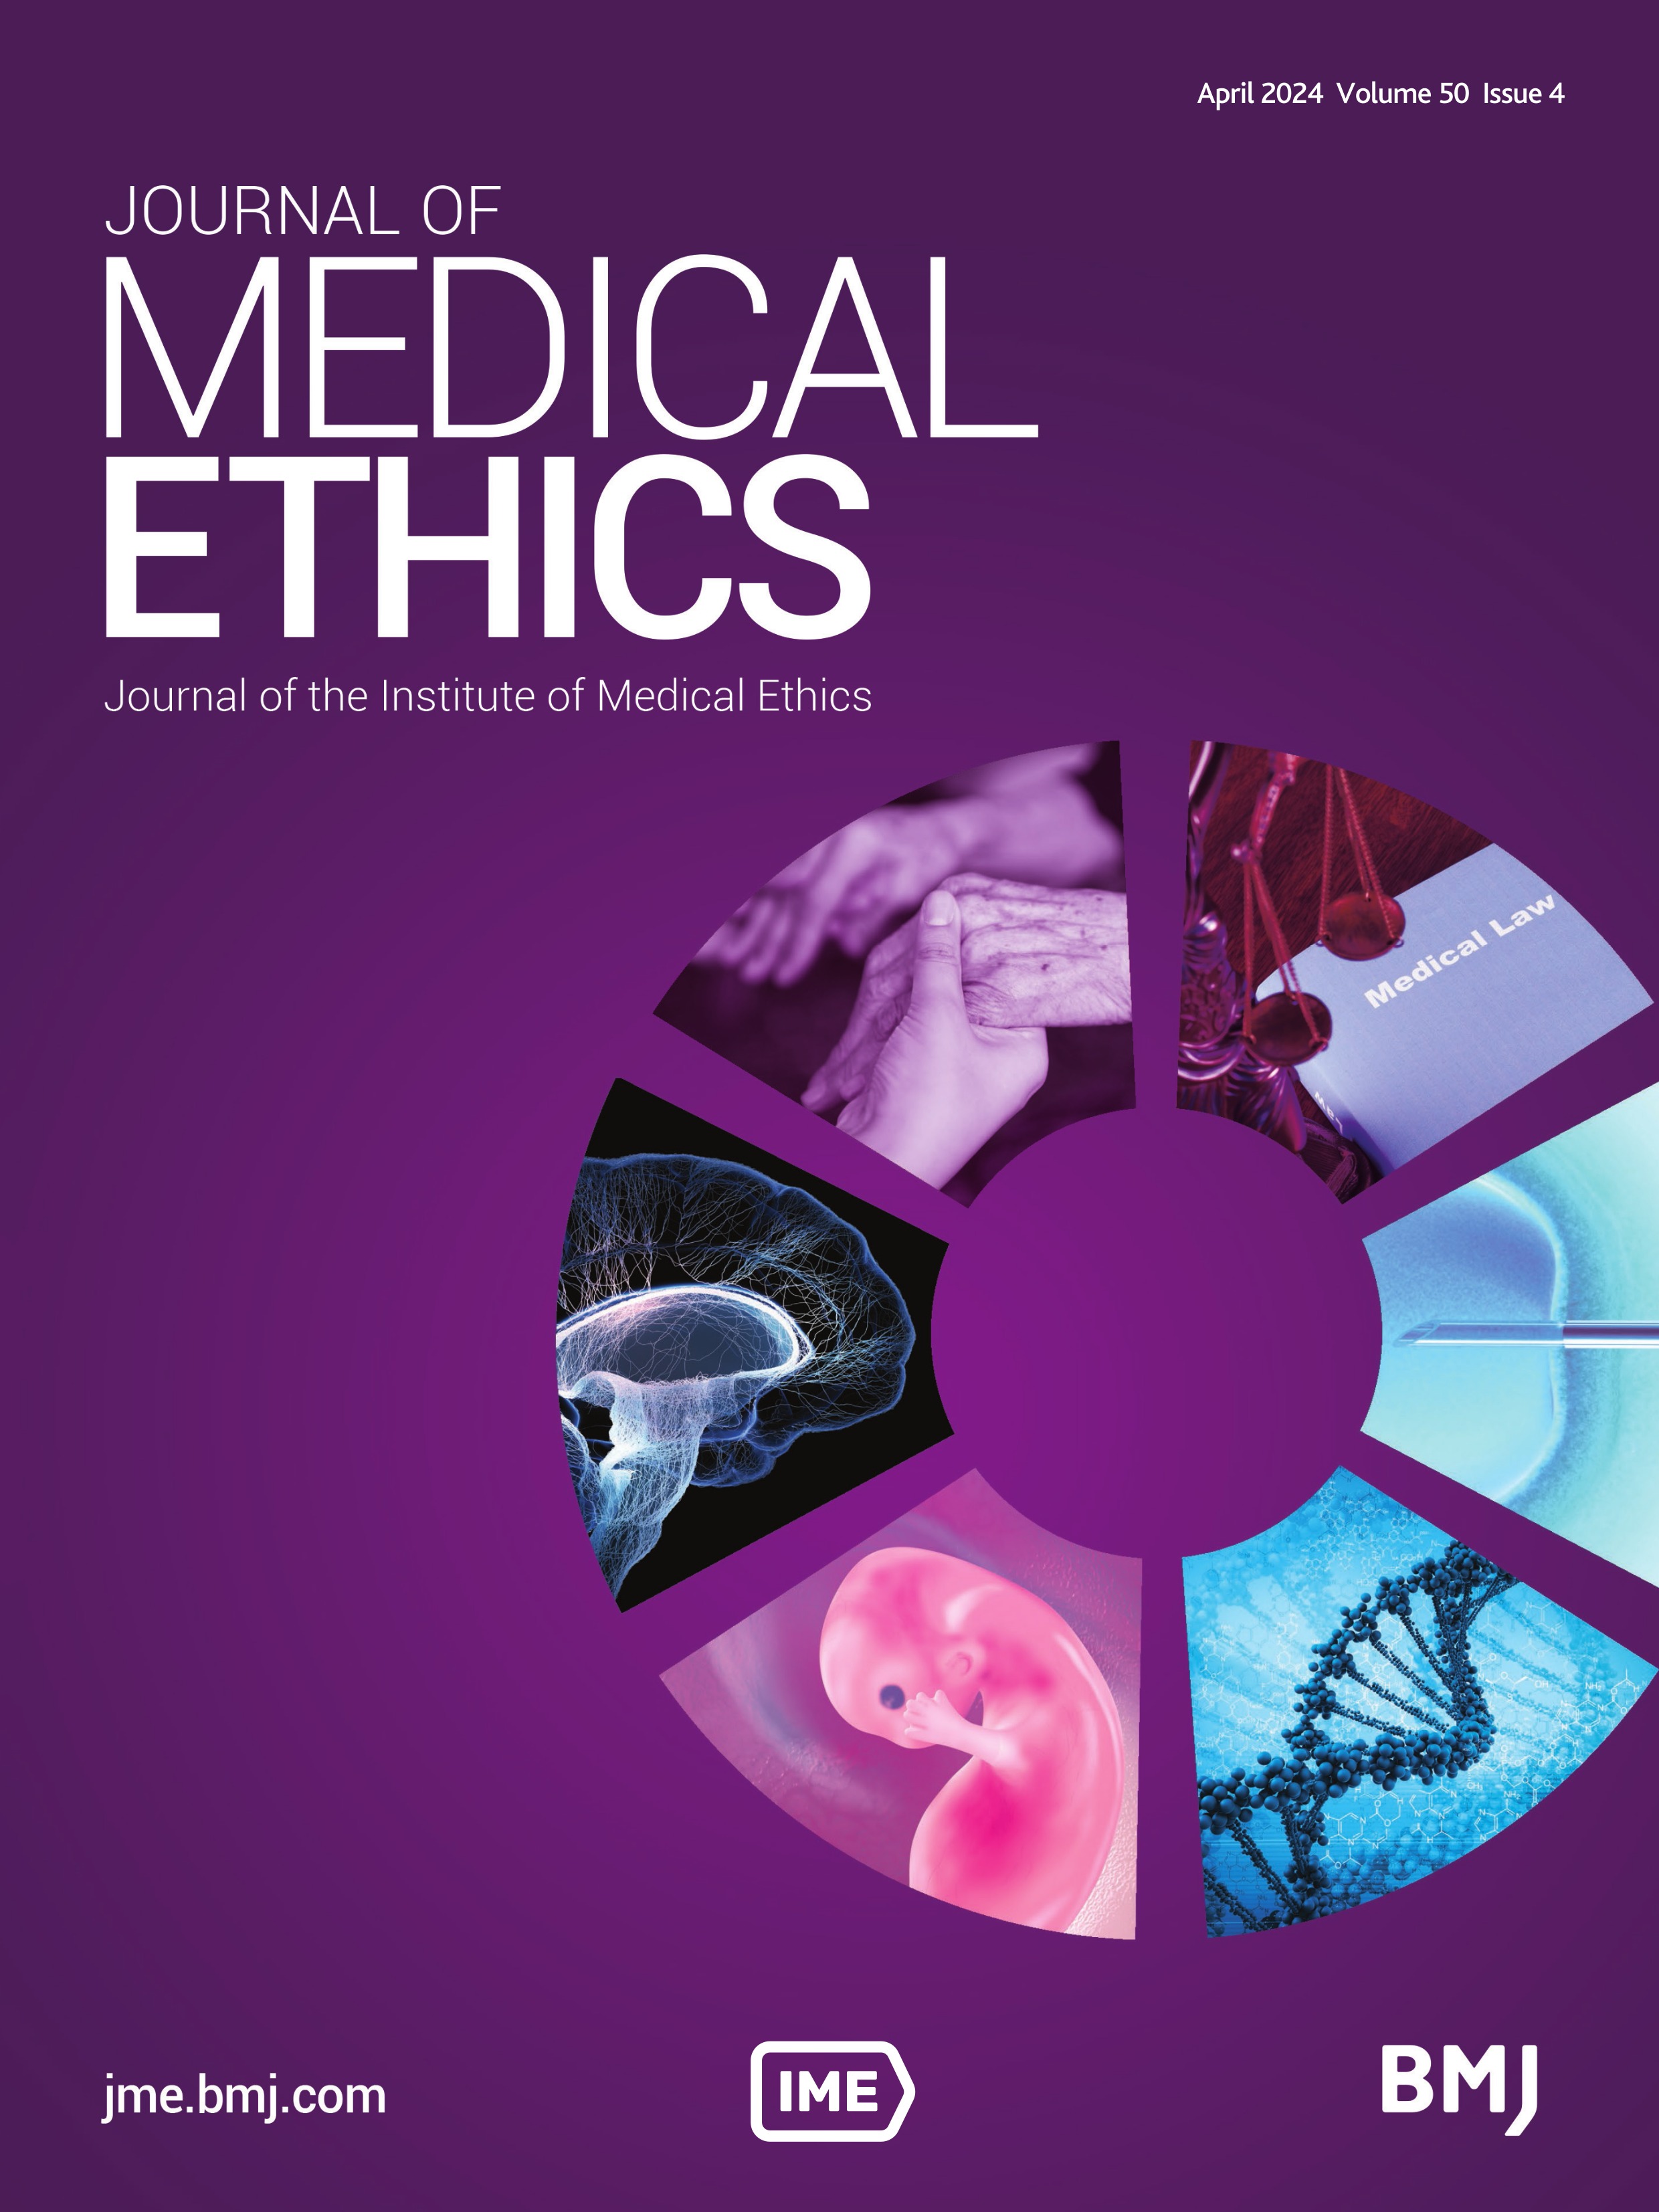 Medical ethics, equity and social justice